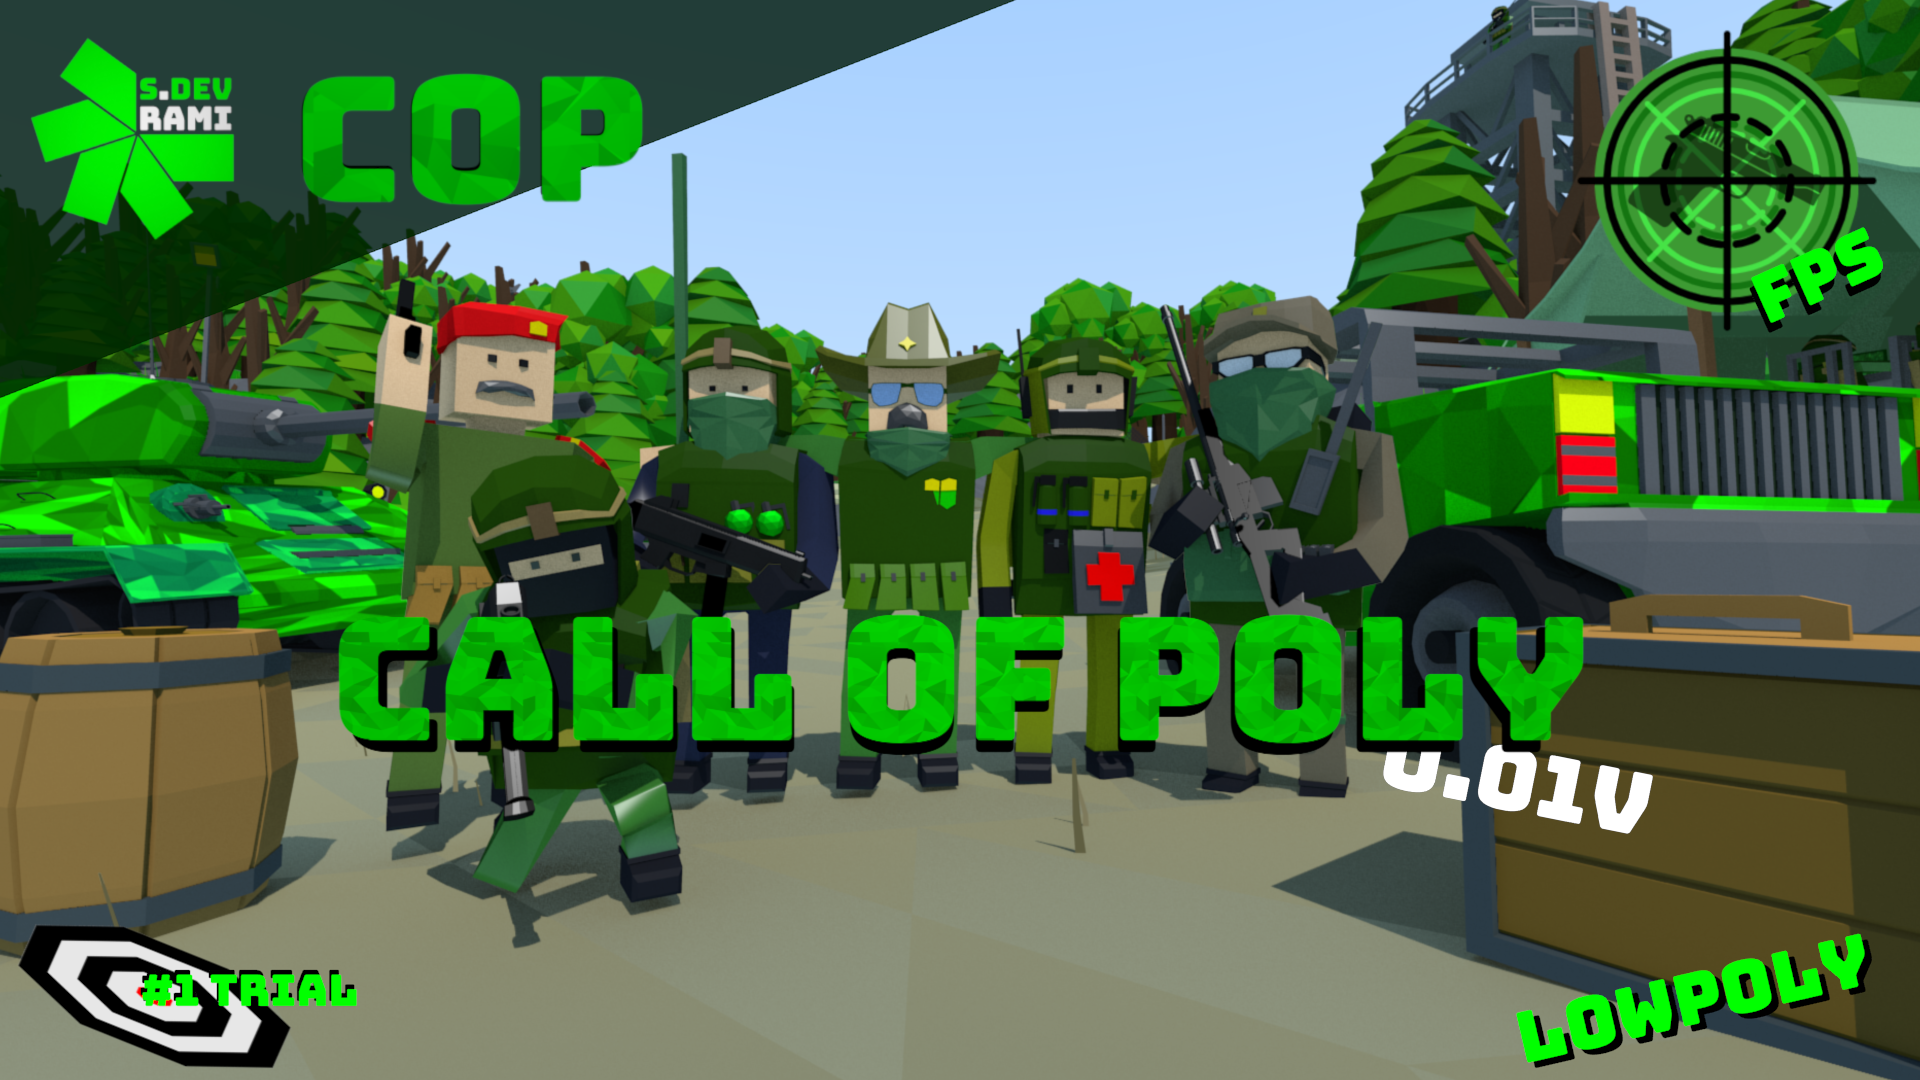 CALL OF POLY